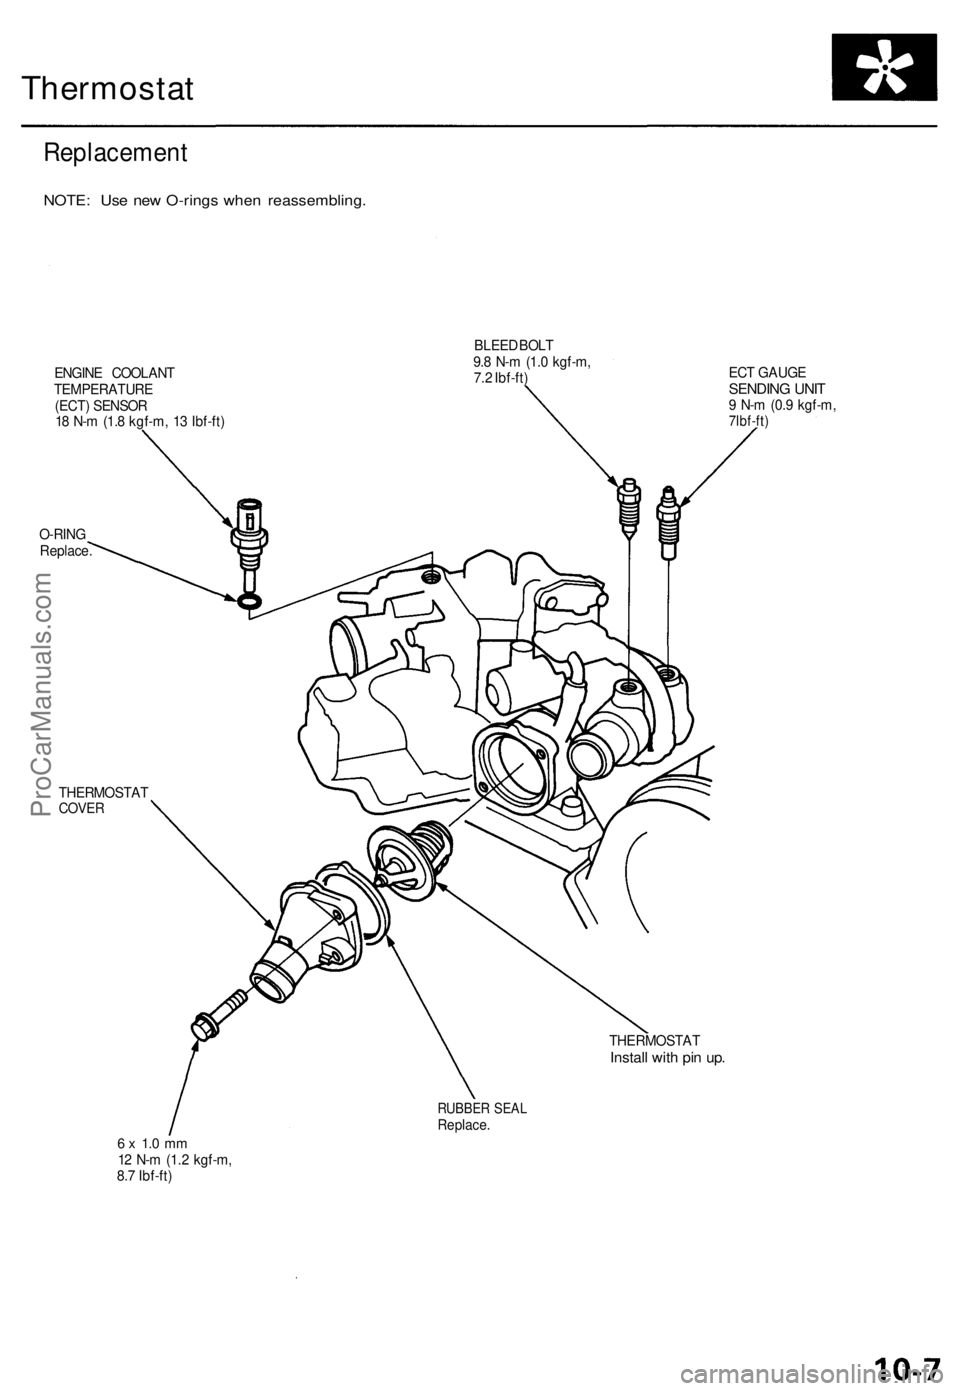 ACURA TL 1995  Service Repair Manual 
Thermostat

Replacement

NOTE: Use new O-rings when reassembling.

ENGINE COOLANT

TEMPERATURE

(ECT) SENSOR

18 N-m (1.8 kgf-m, 13 Ibf-ft) 
BLEED BOLT

9.8 N-m (1.0 kgf-m,

7.2 Ibf-ft)

O-RING

Repl